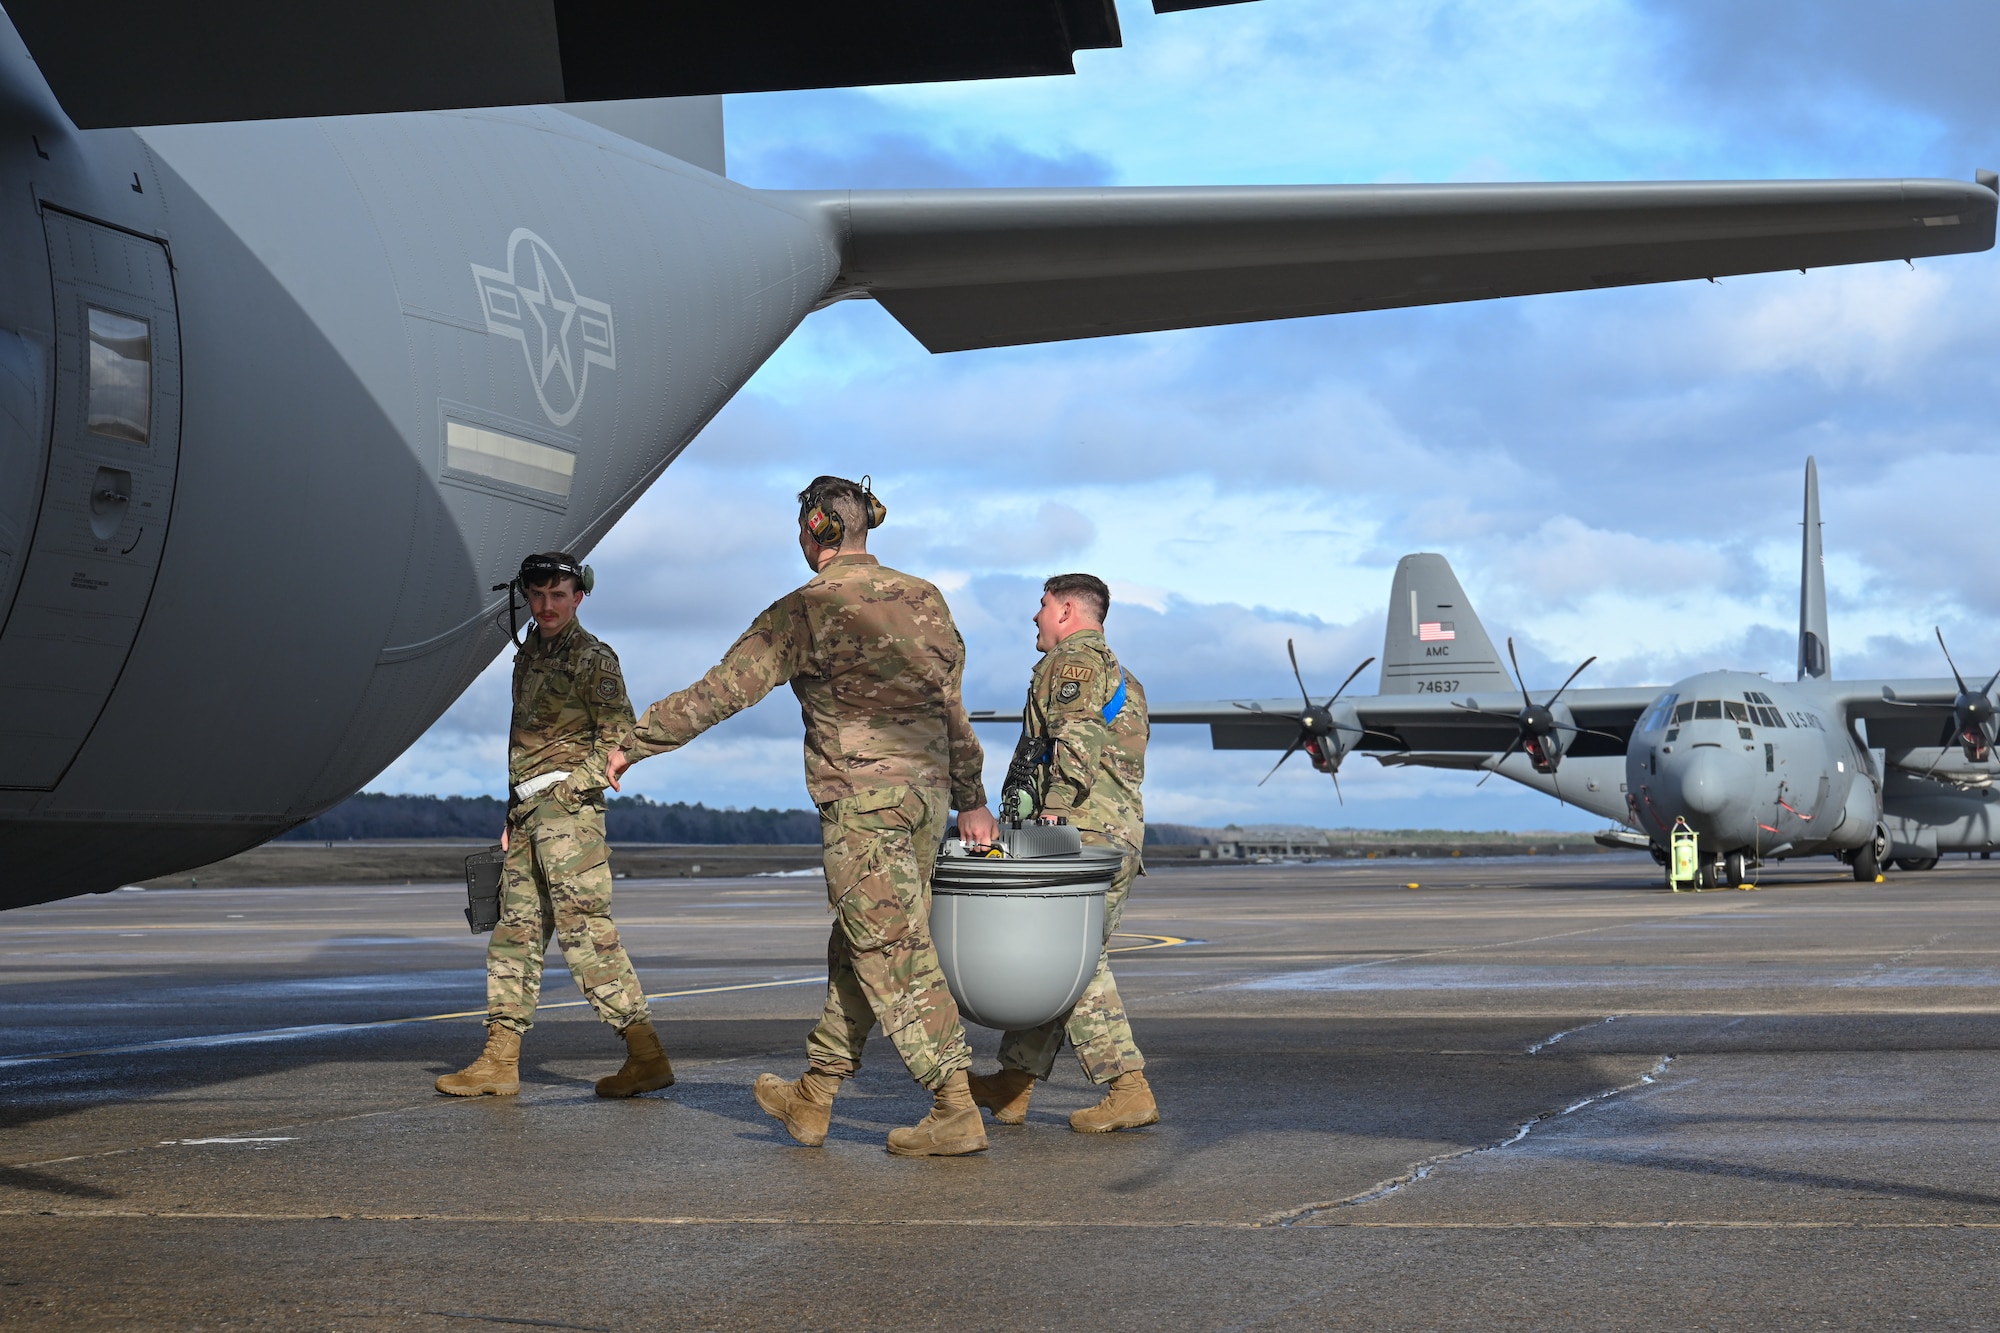 Two Airmen carry a communications pod toward a C-130J as another Airman walks in front of them and watches.